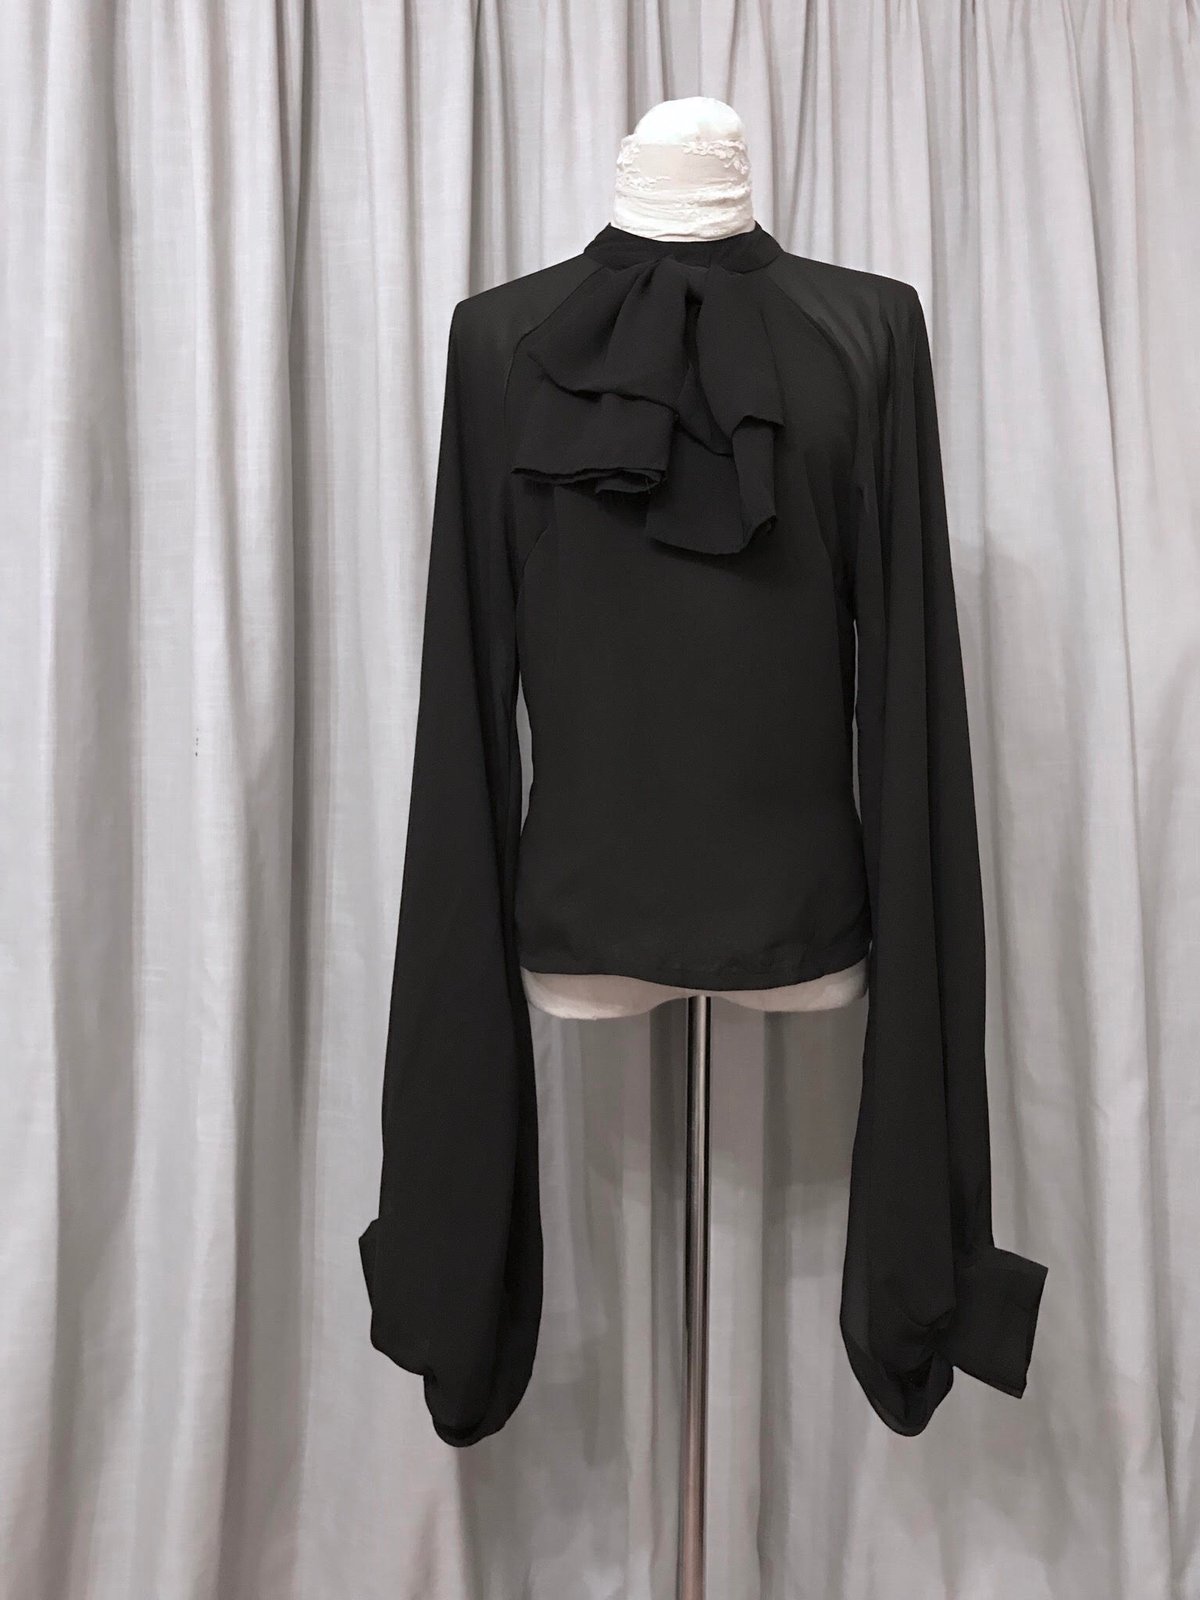 SAMPLE SALE - Lace Collar Sheer Blouse Black | Shades of Silence